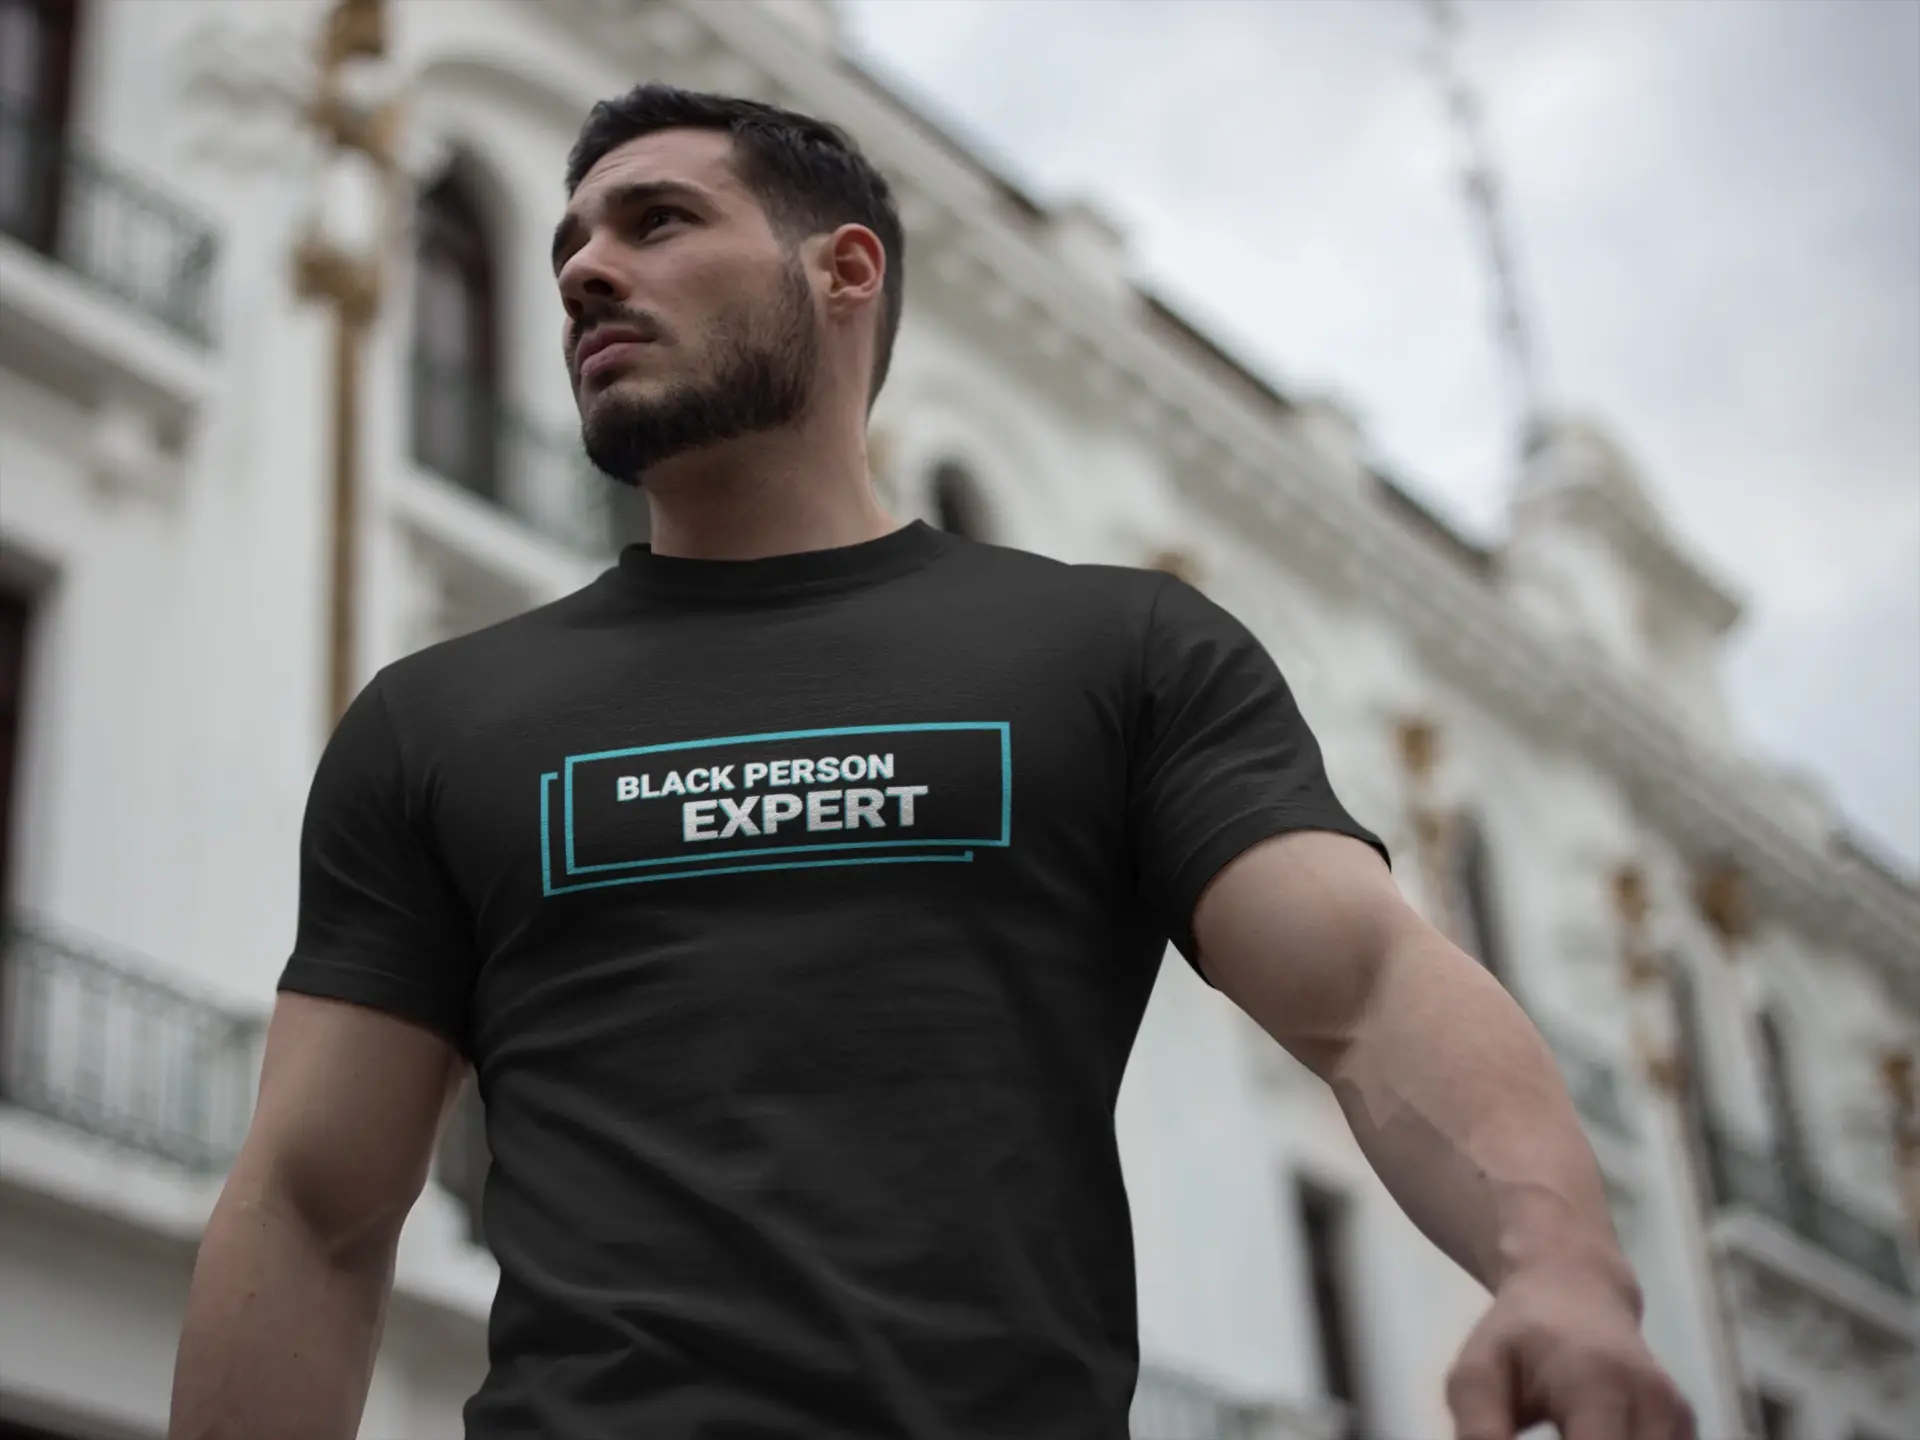 strong handsome man wearing a tshirt mockup while walking in the city a17664